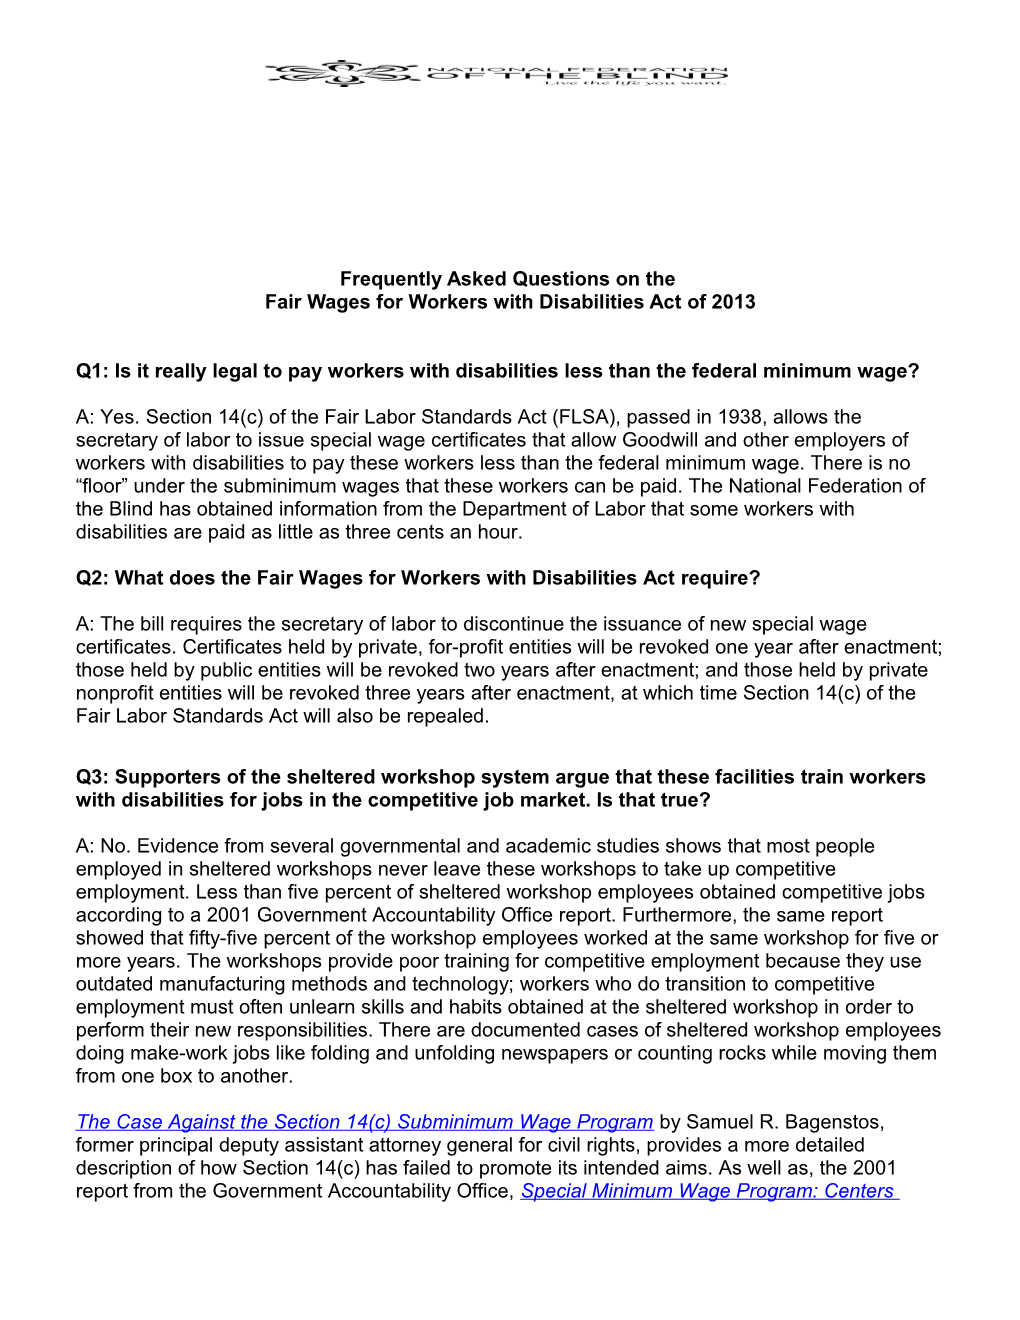 Fair Wages for Workers with Disabilities Act of 2013